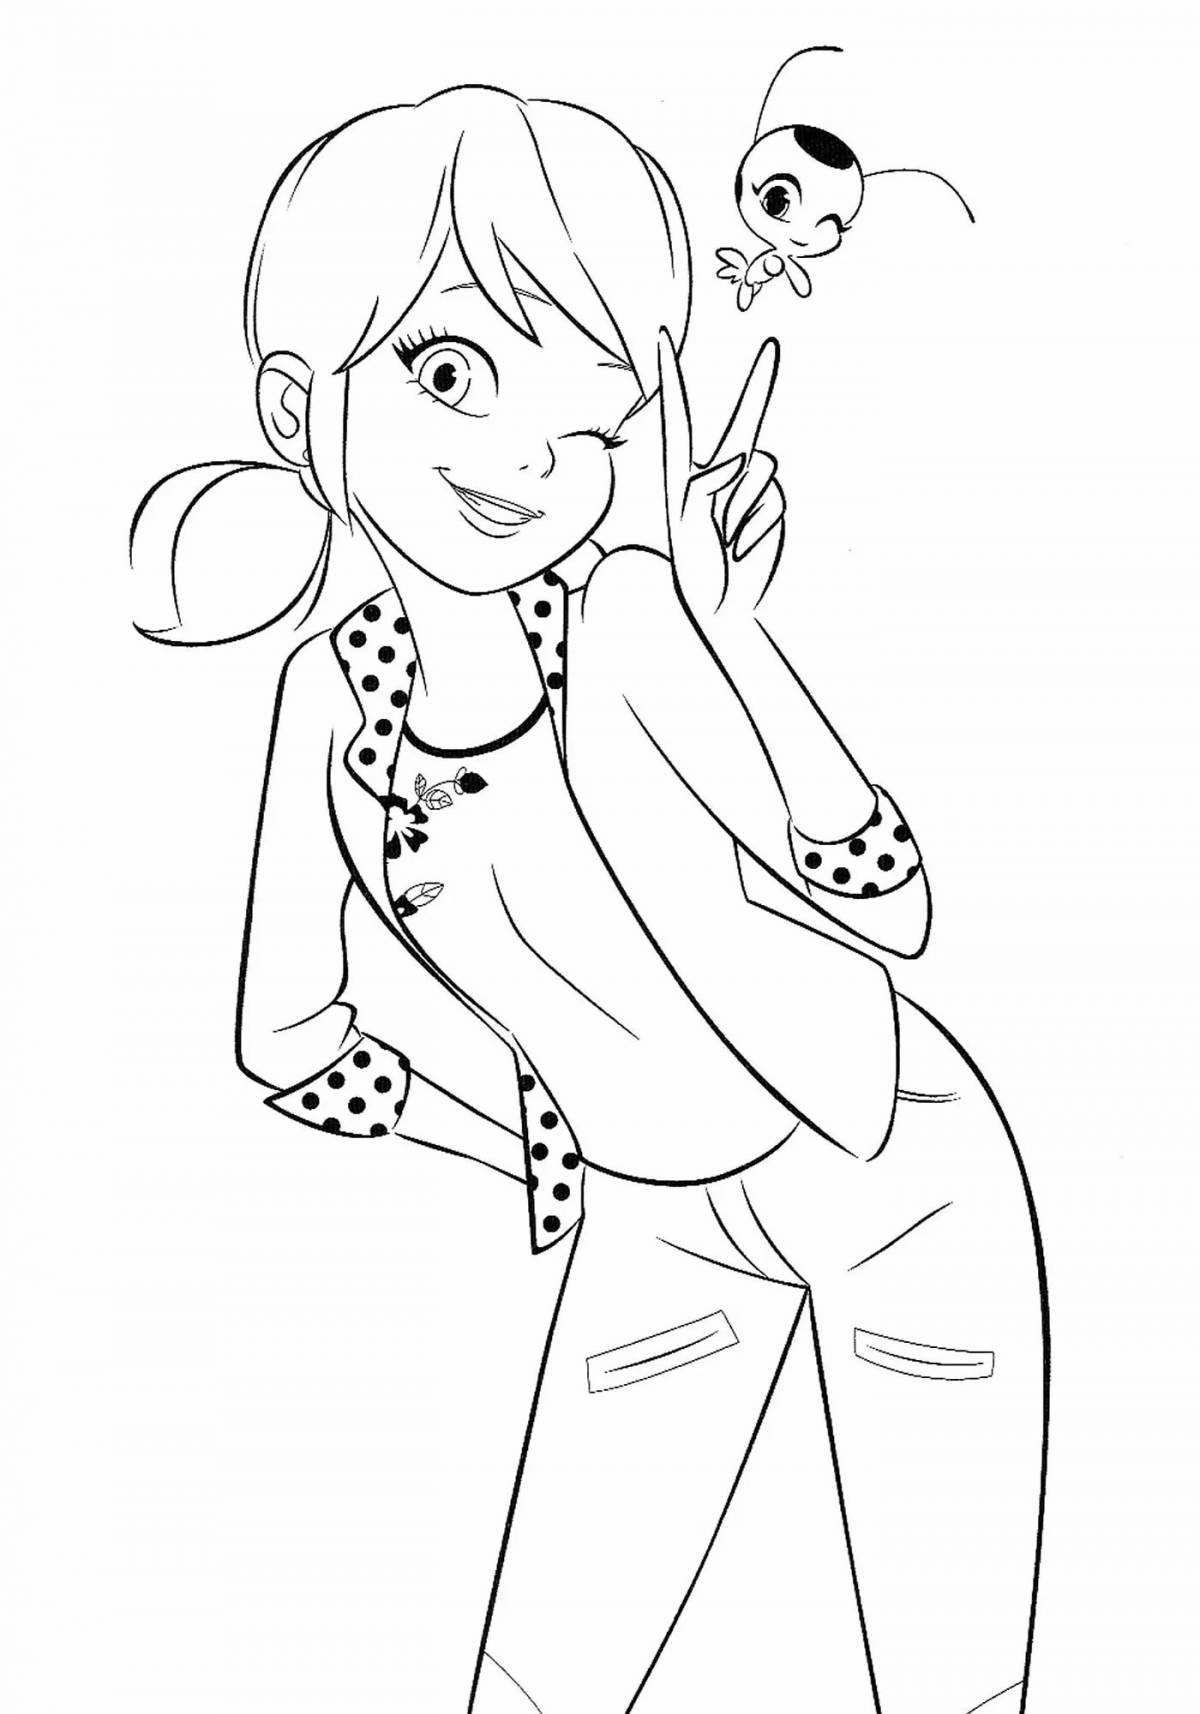 Marinette's adorable coloring book for preschoolers